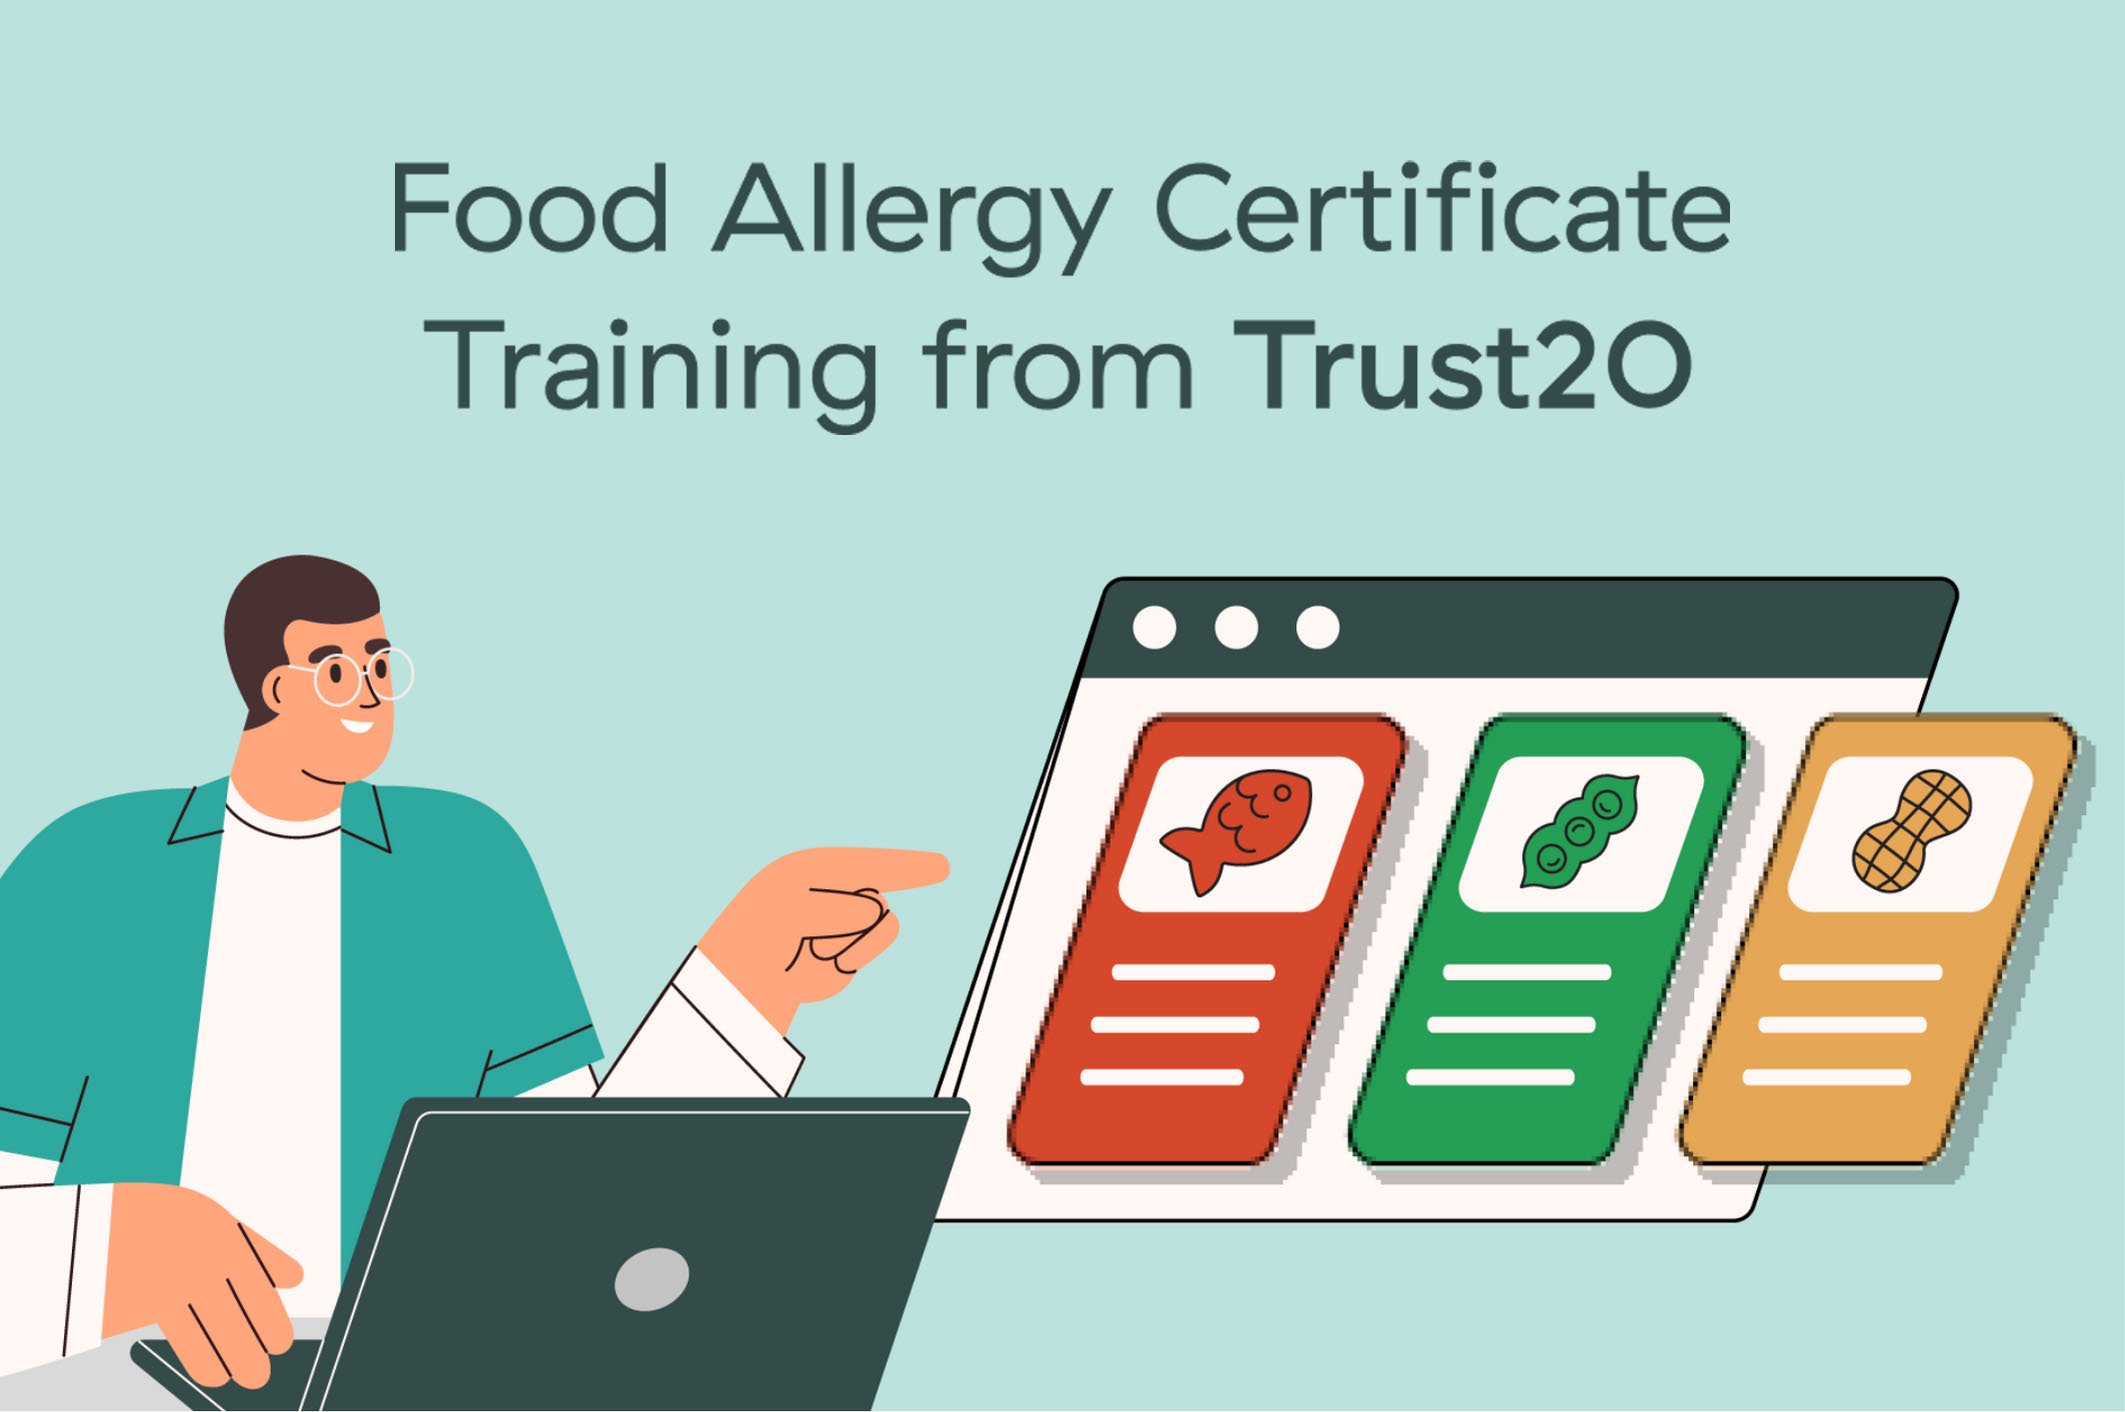 Take Trust20's Food Allergy Certificate Training Today